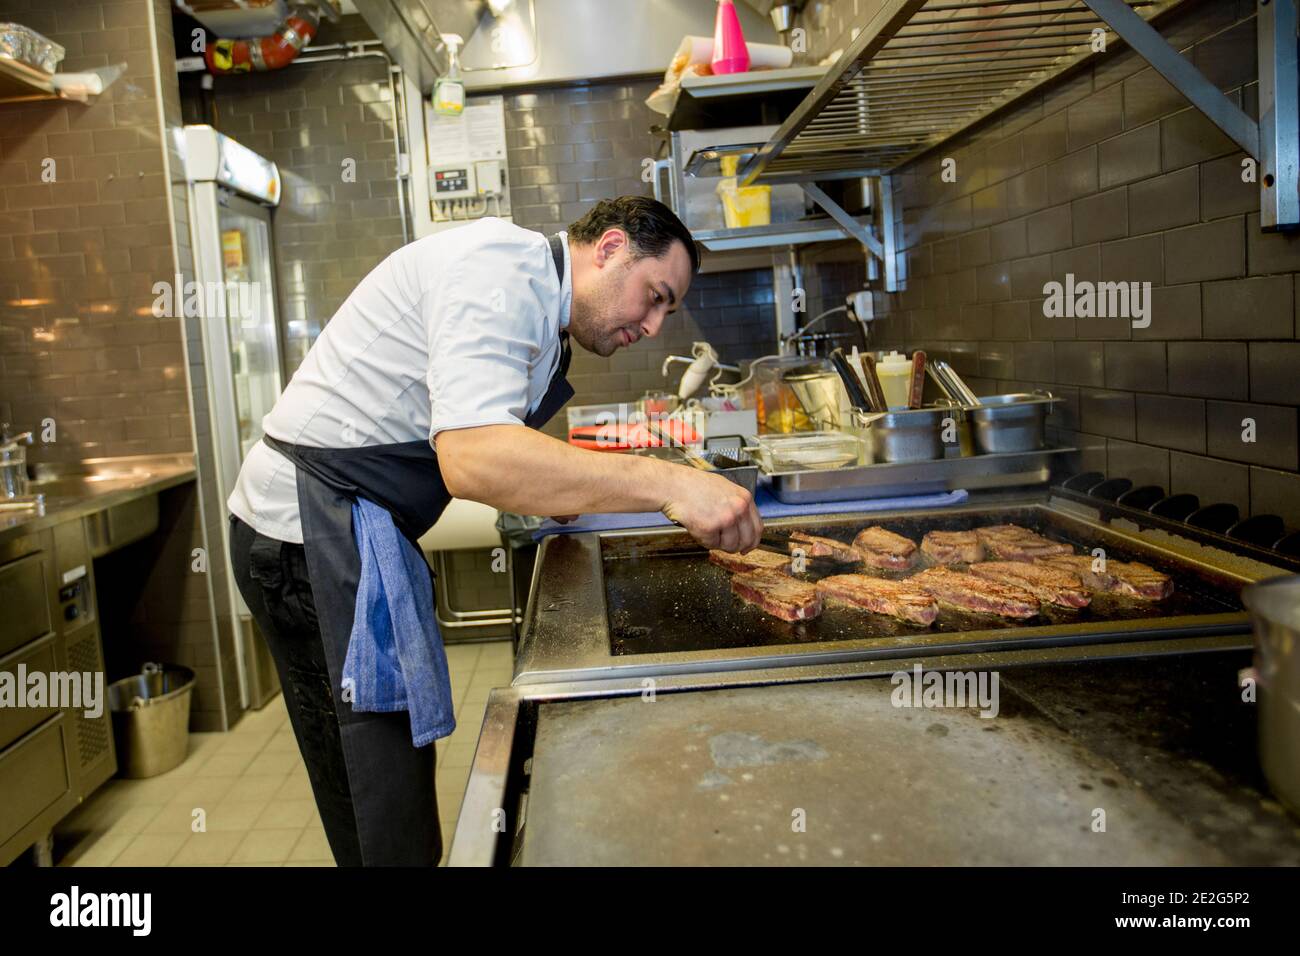 The chef prepares the restaurant food. Stock Photo